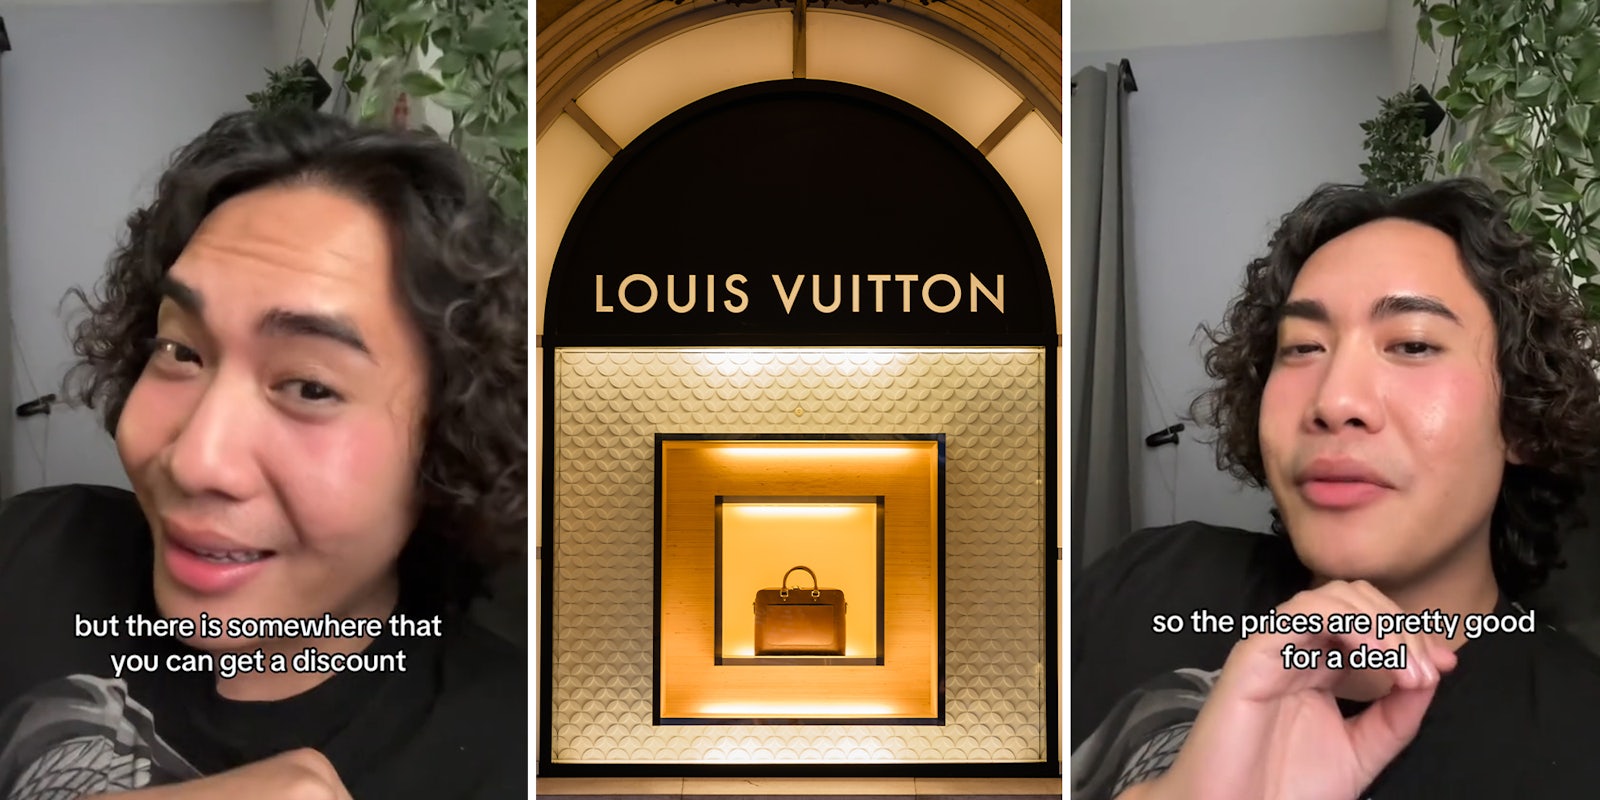 Worker share hack to getting discount on Louis Vuitton products